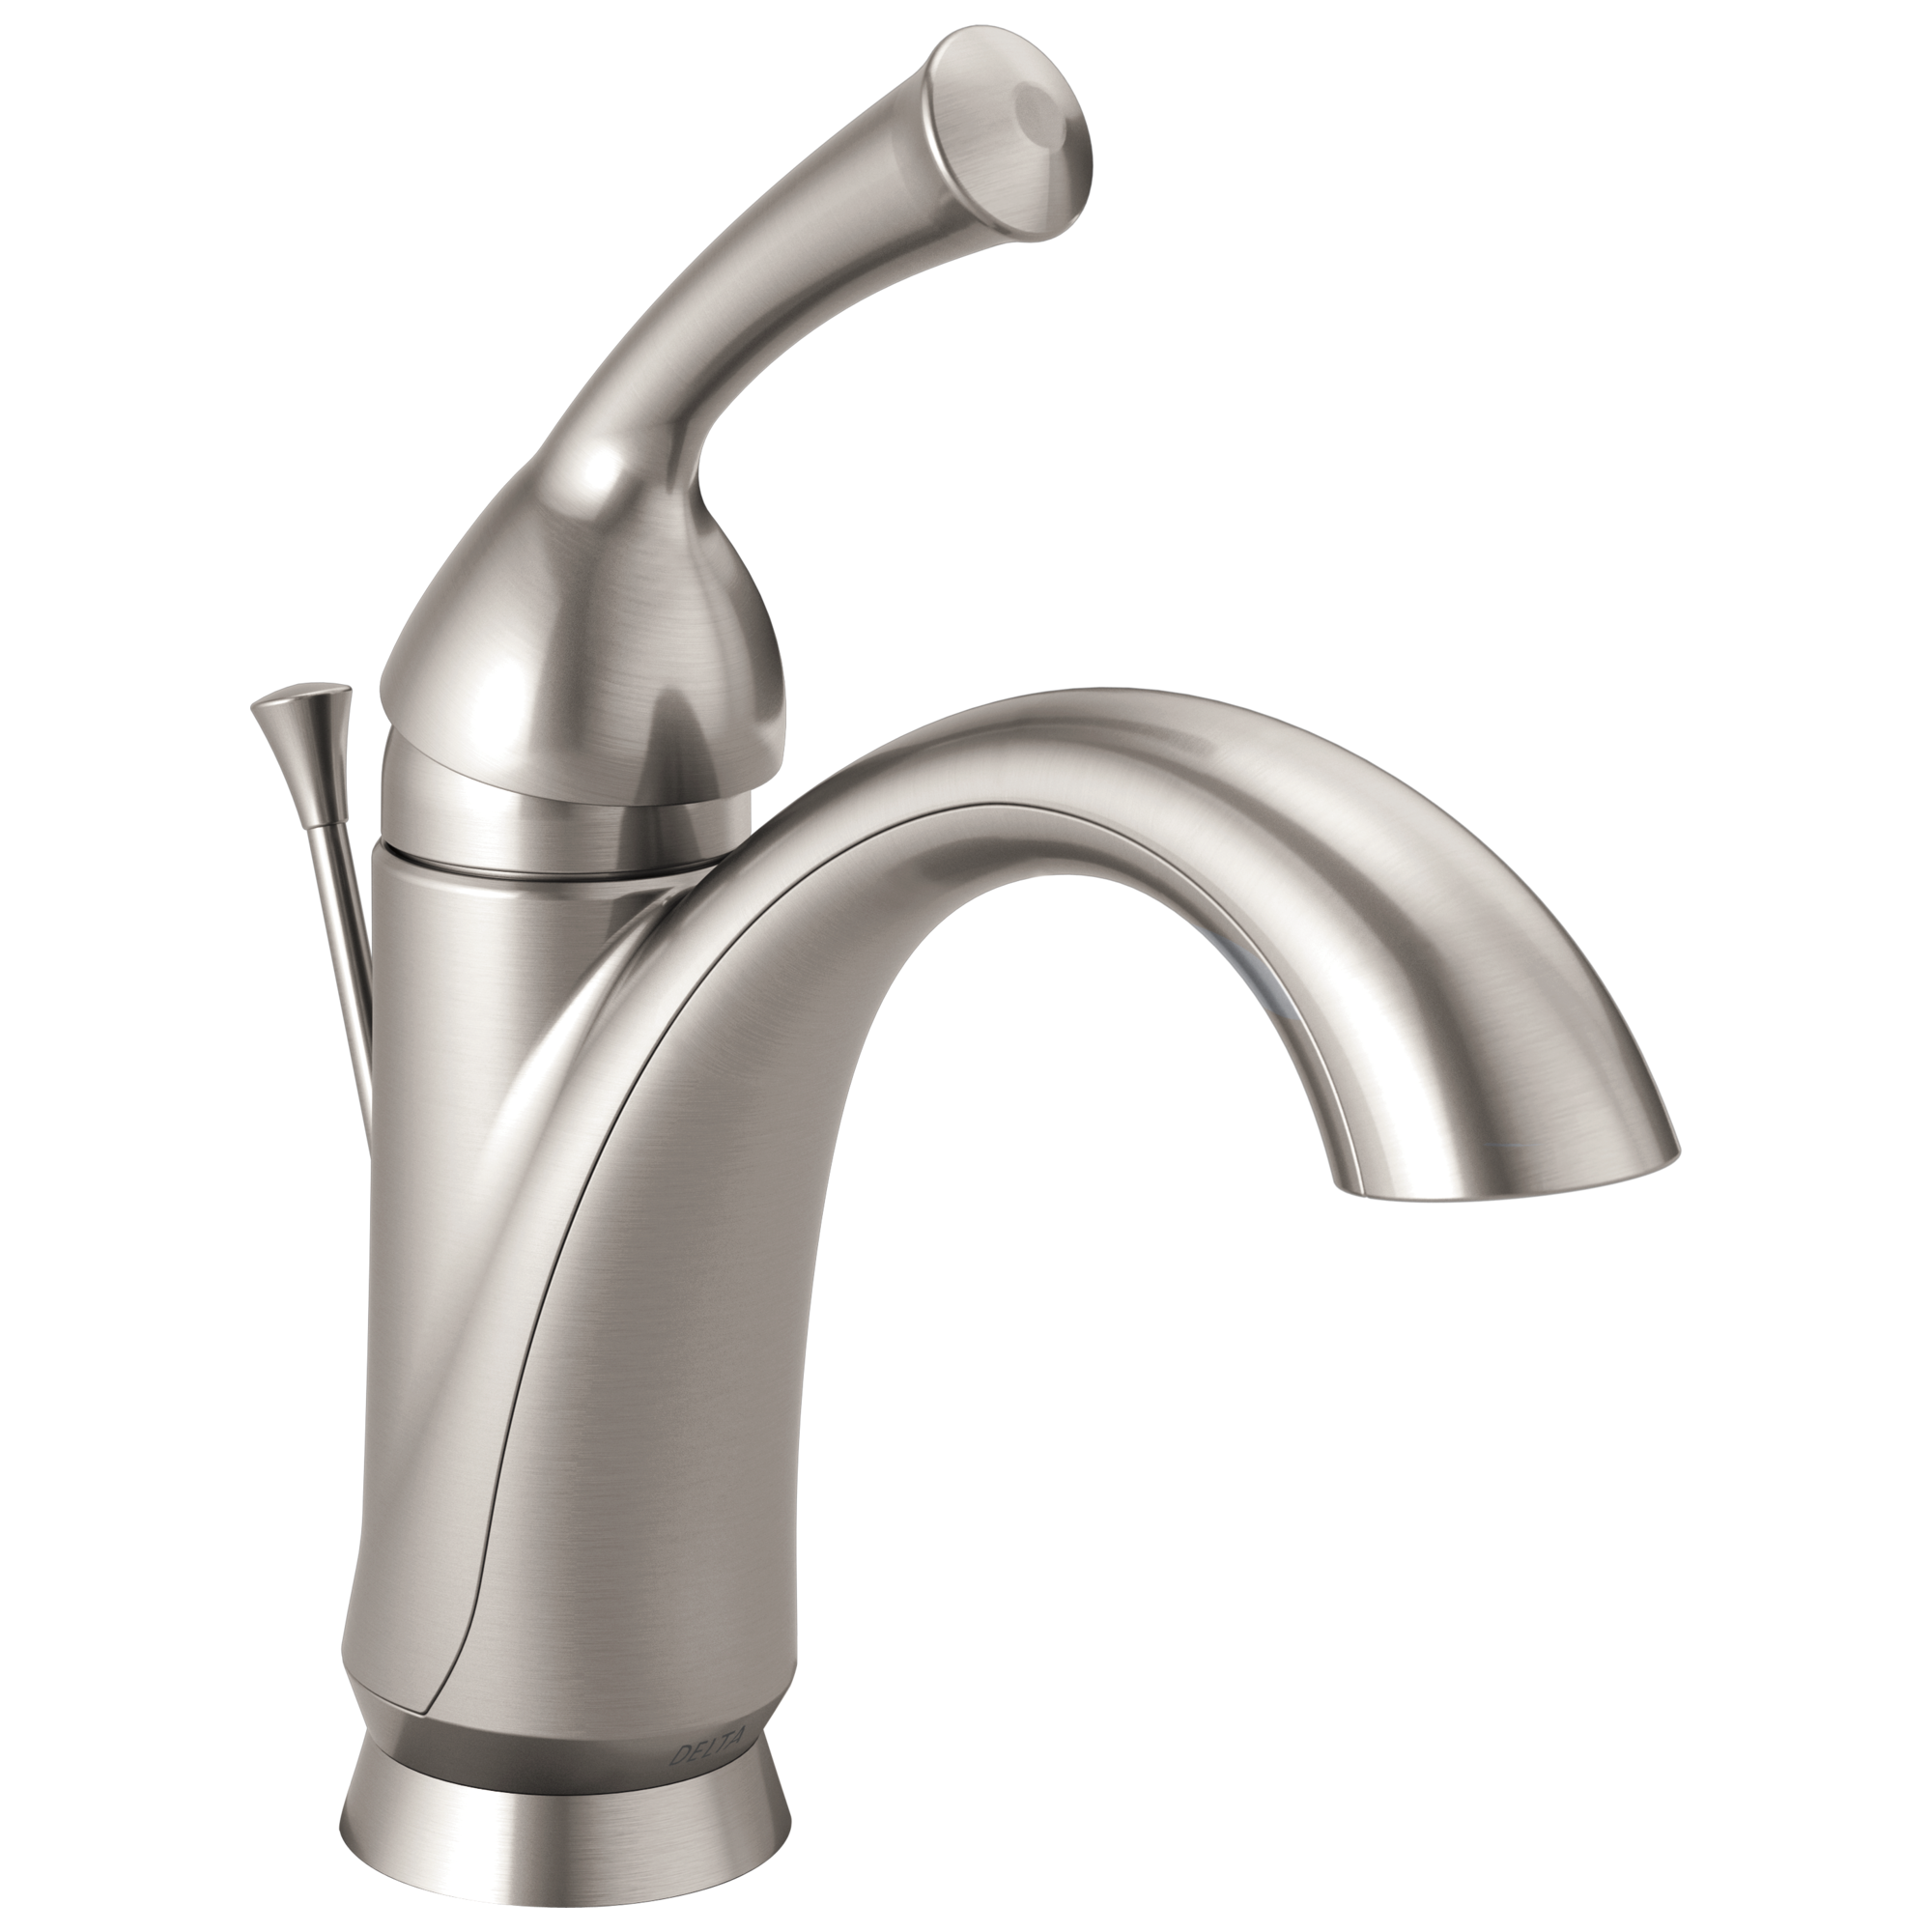 Delta Haywood Single Handle Single Hole Lavatory Faucet in Stainless 15999-SS-DST - image 1 of 2